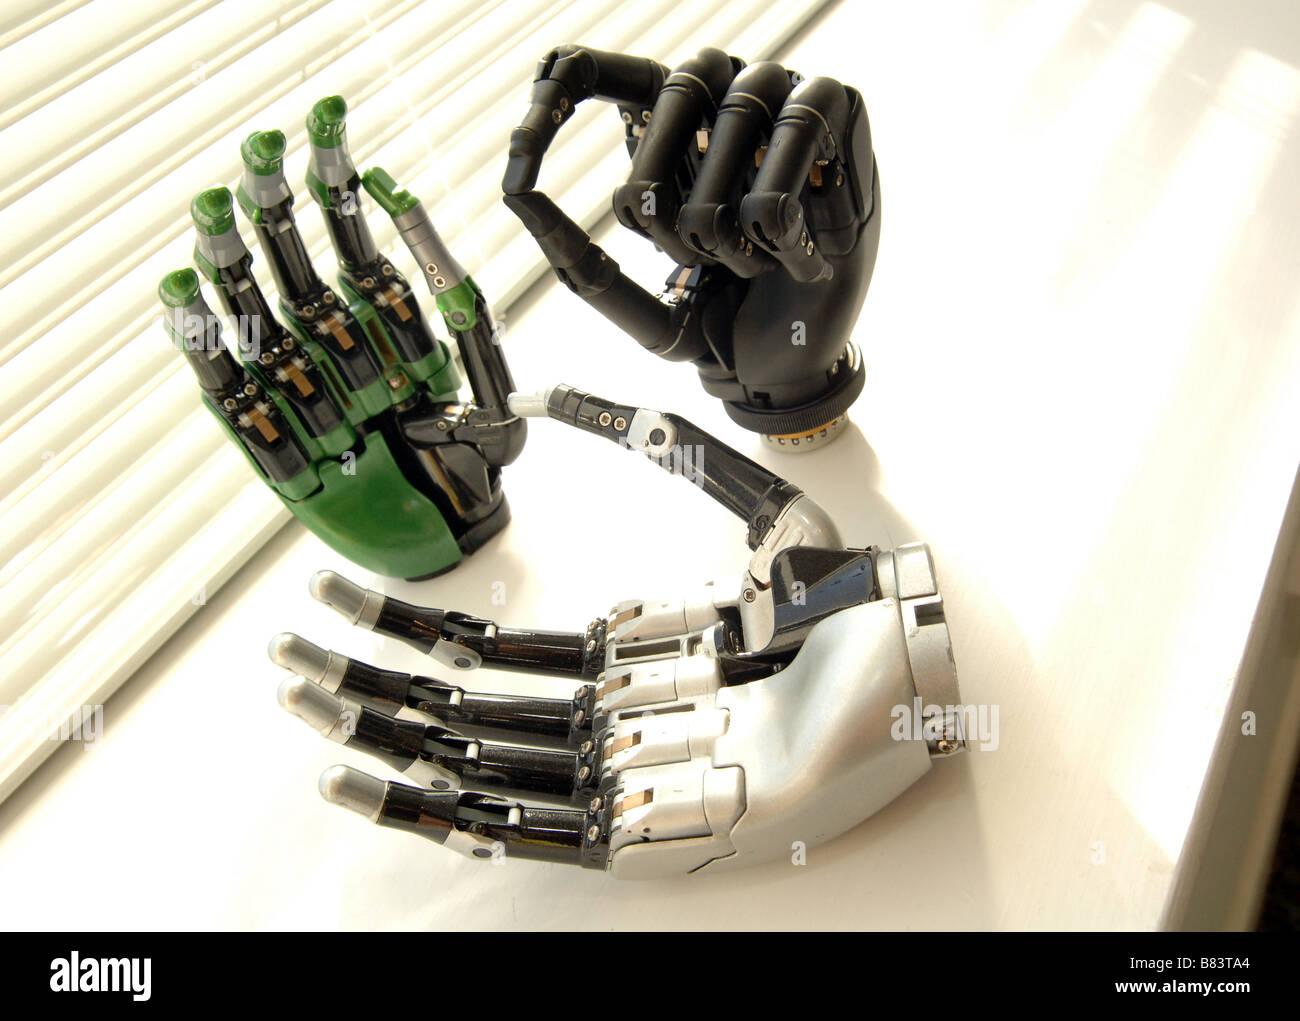 Bionic hands for amputees. Each digit can move. Stock Photo